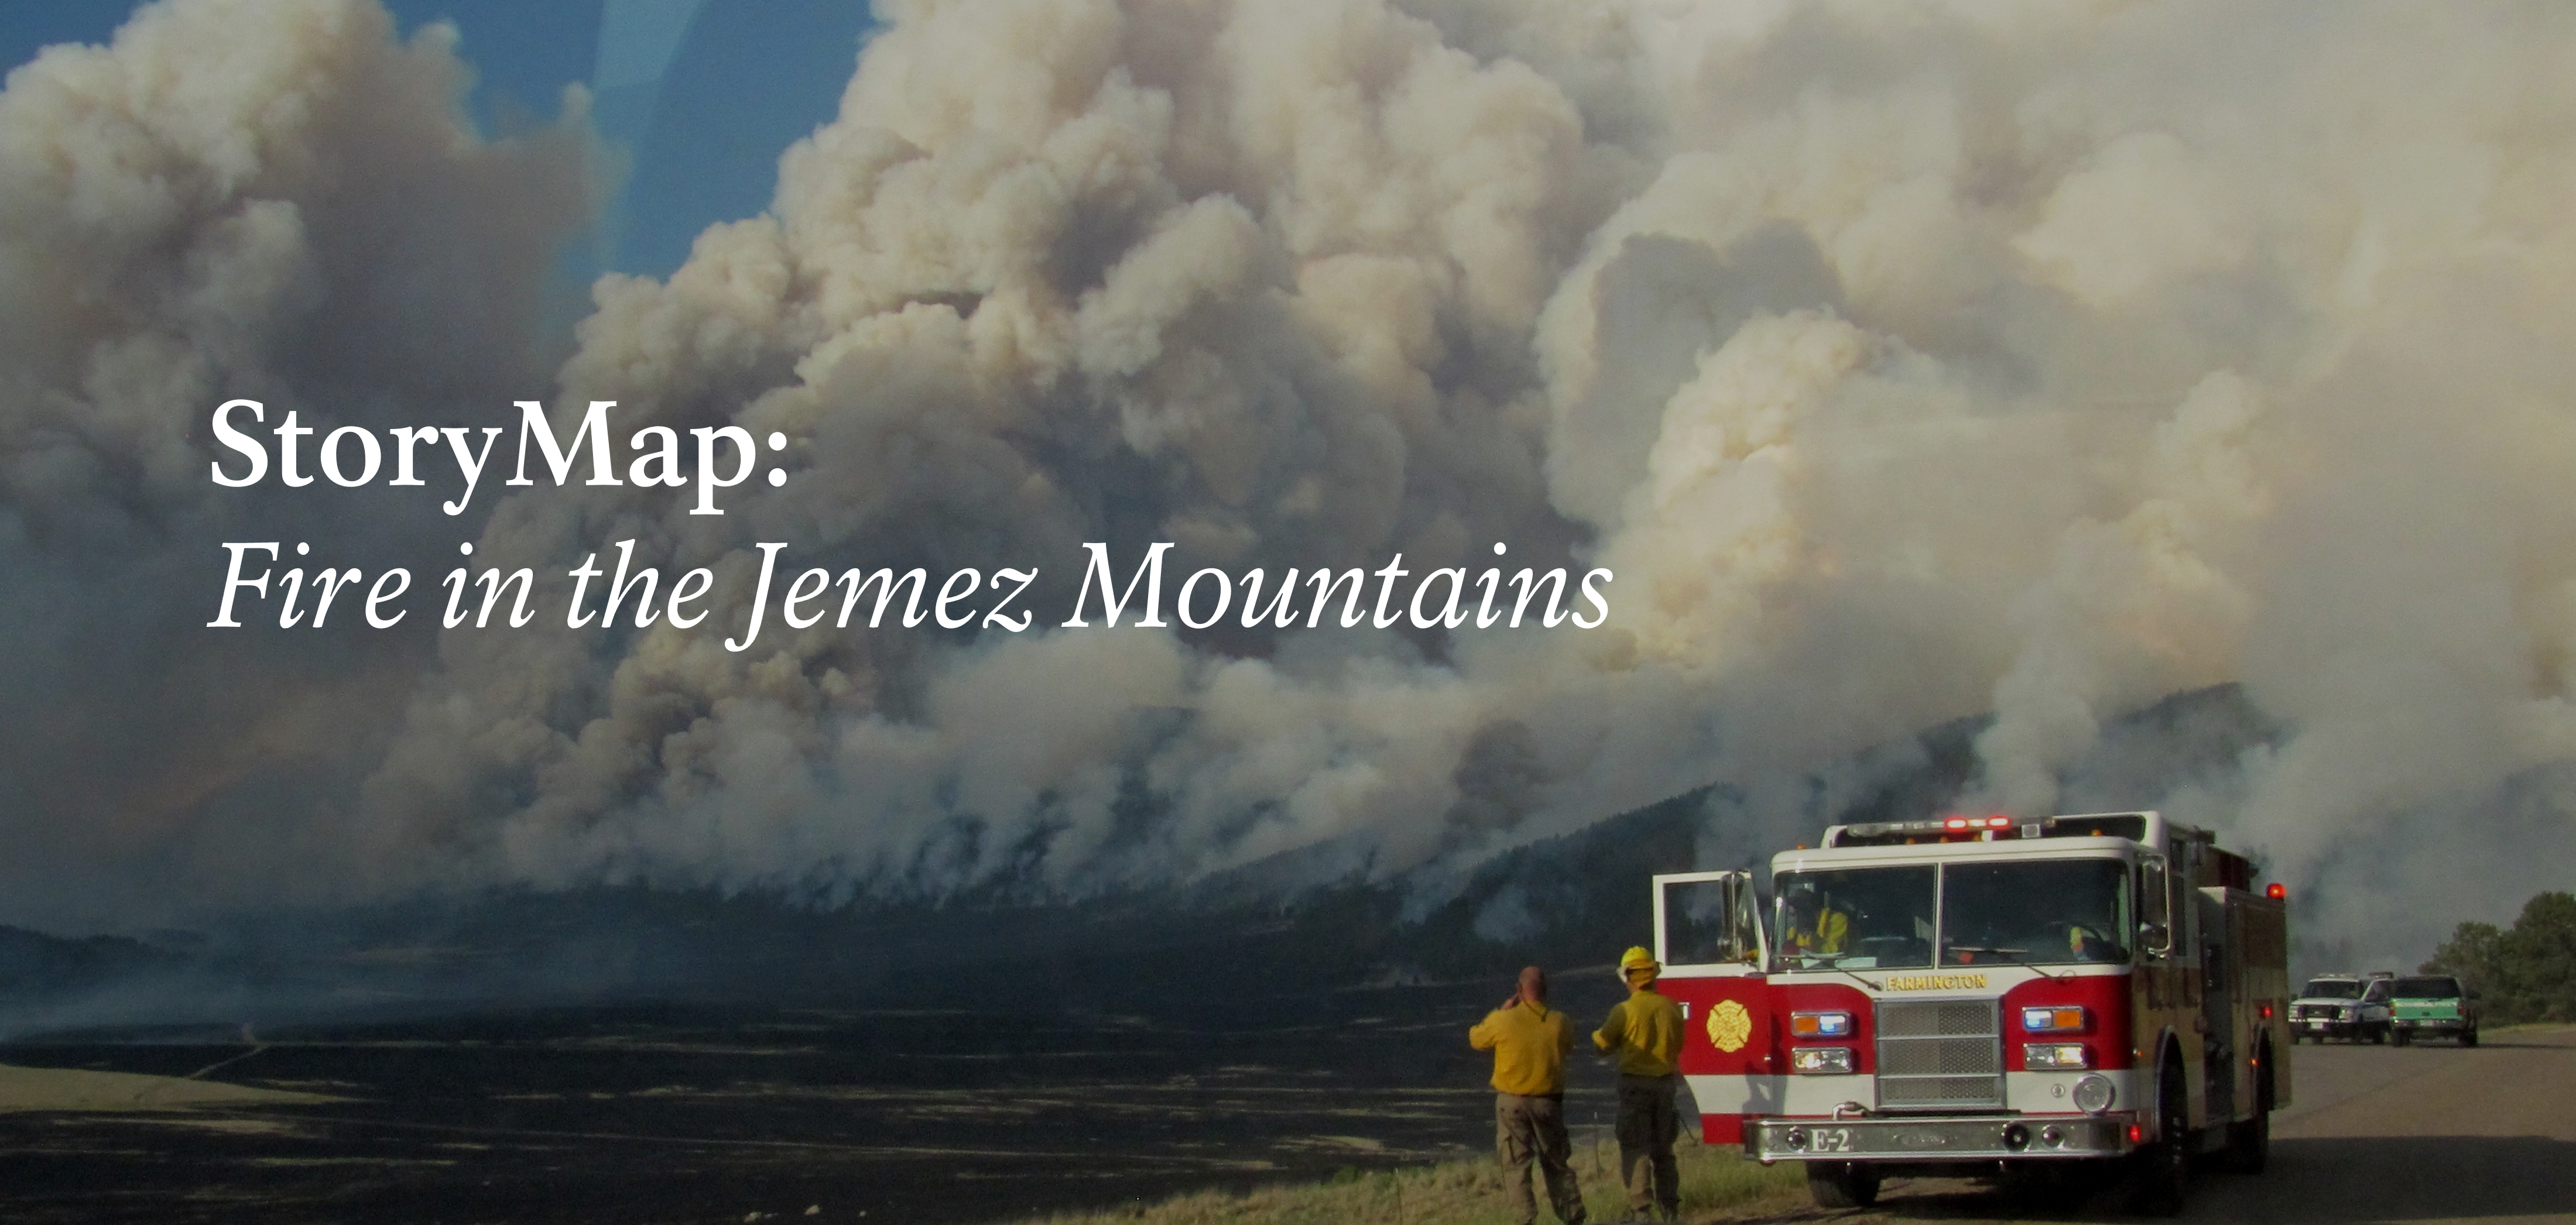 Firefighters stand next to a red fire engine, watching a massive wildfire burn a distant hillside. Text says "StoryMap: Fire in the Jemez Mountains."